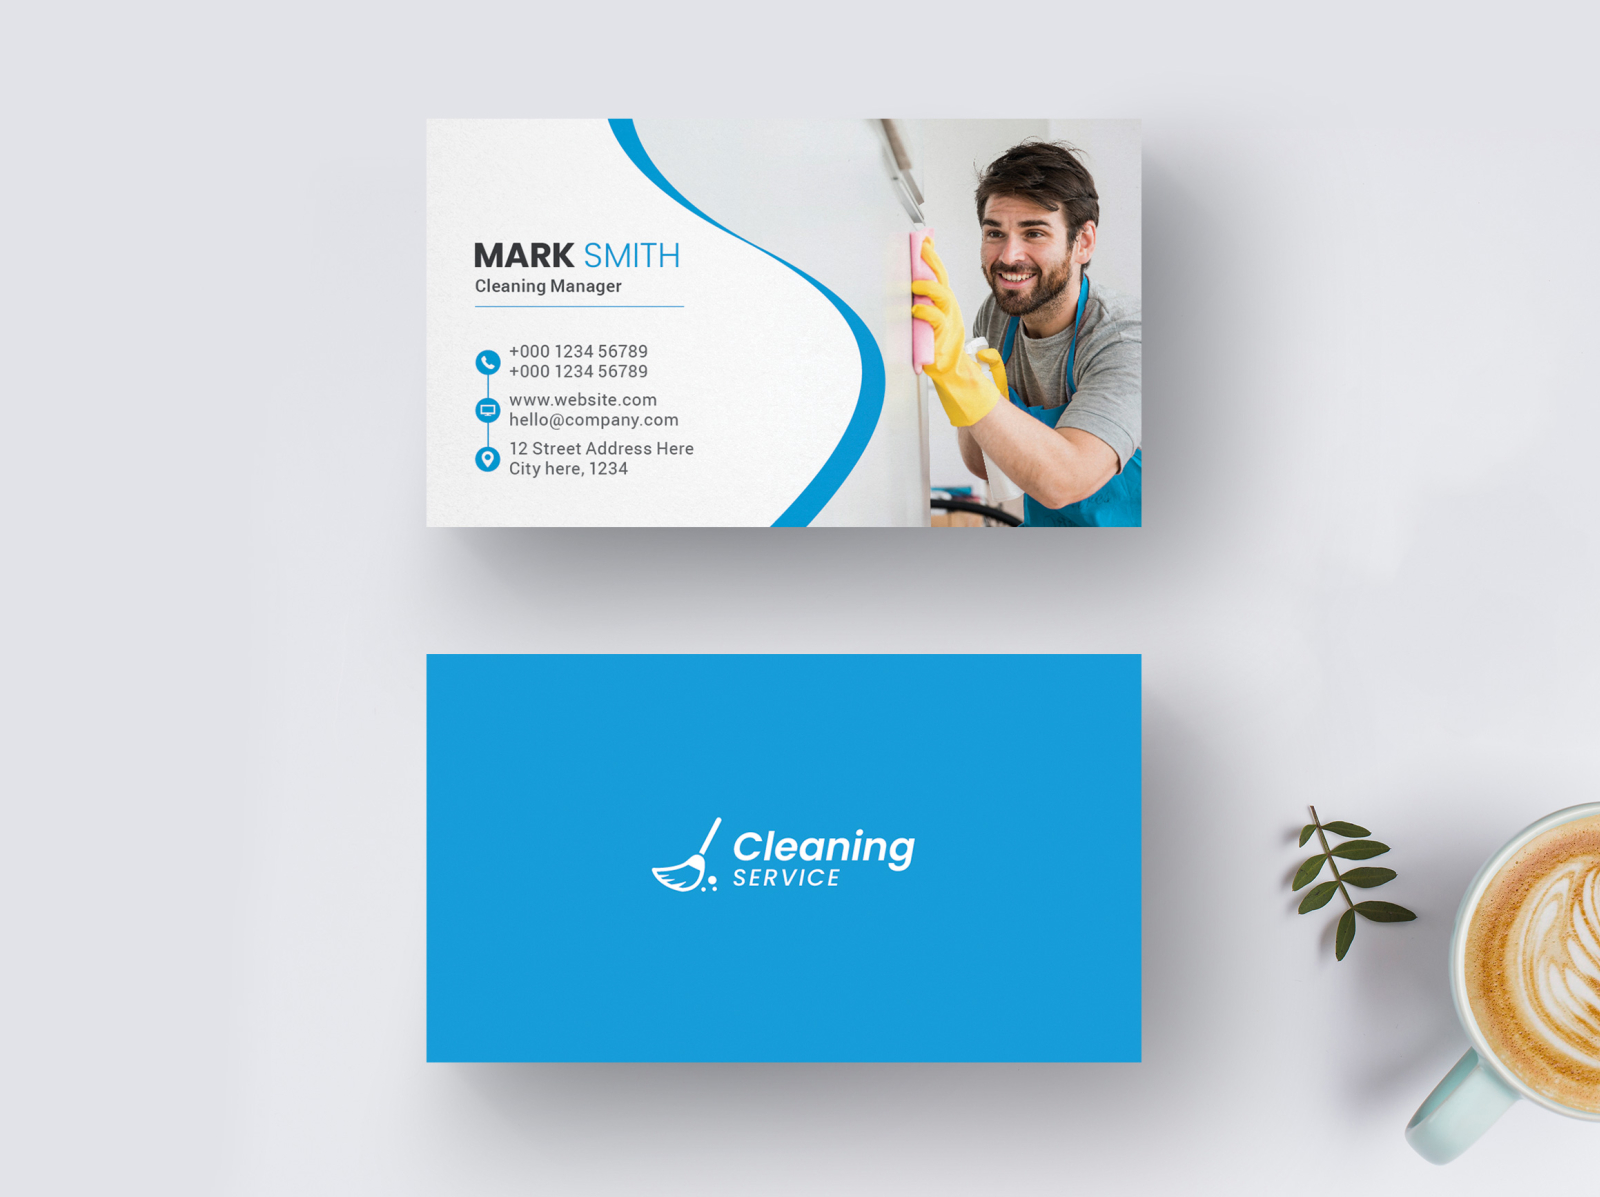 cleaning services business cards templates